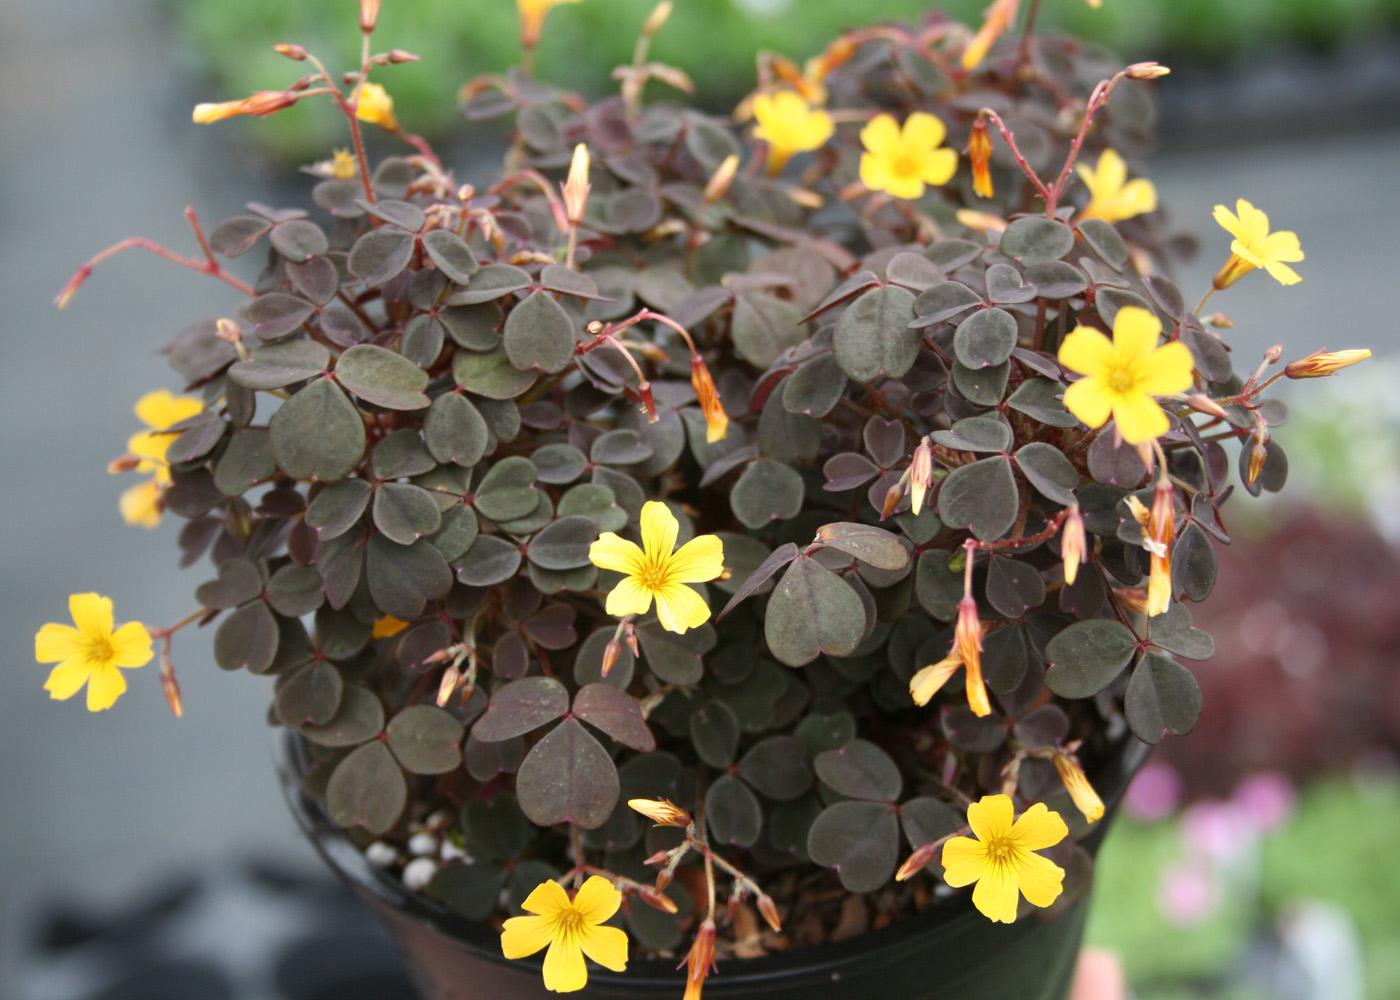 The flowers may be dainty, but the yellow blossoms shine brightly with the dark purple/black foliage background of this Zinfandel shamrock.